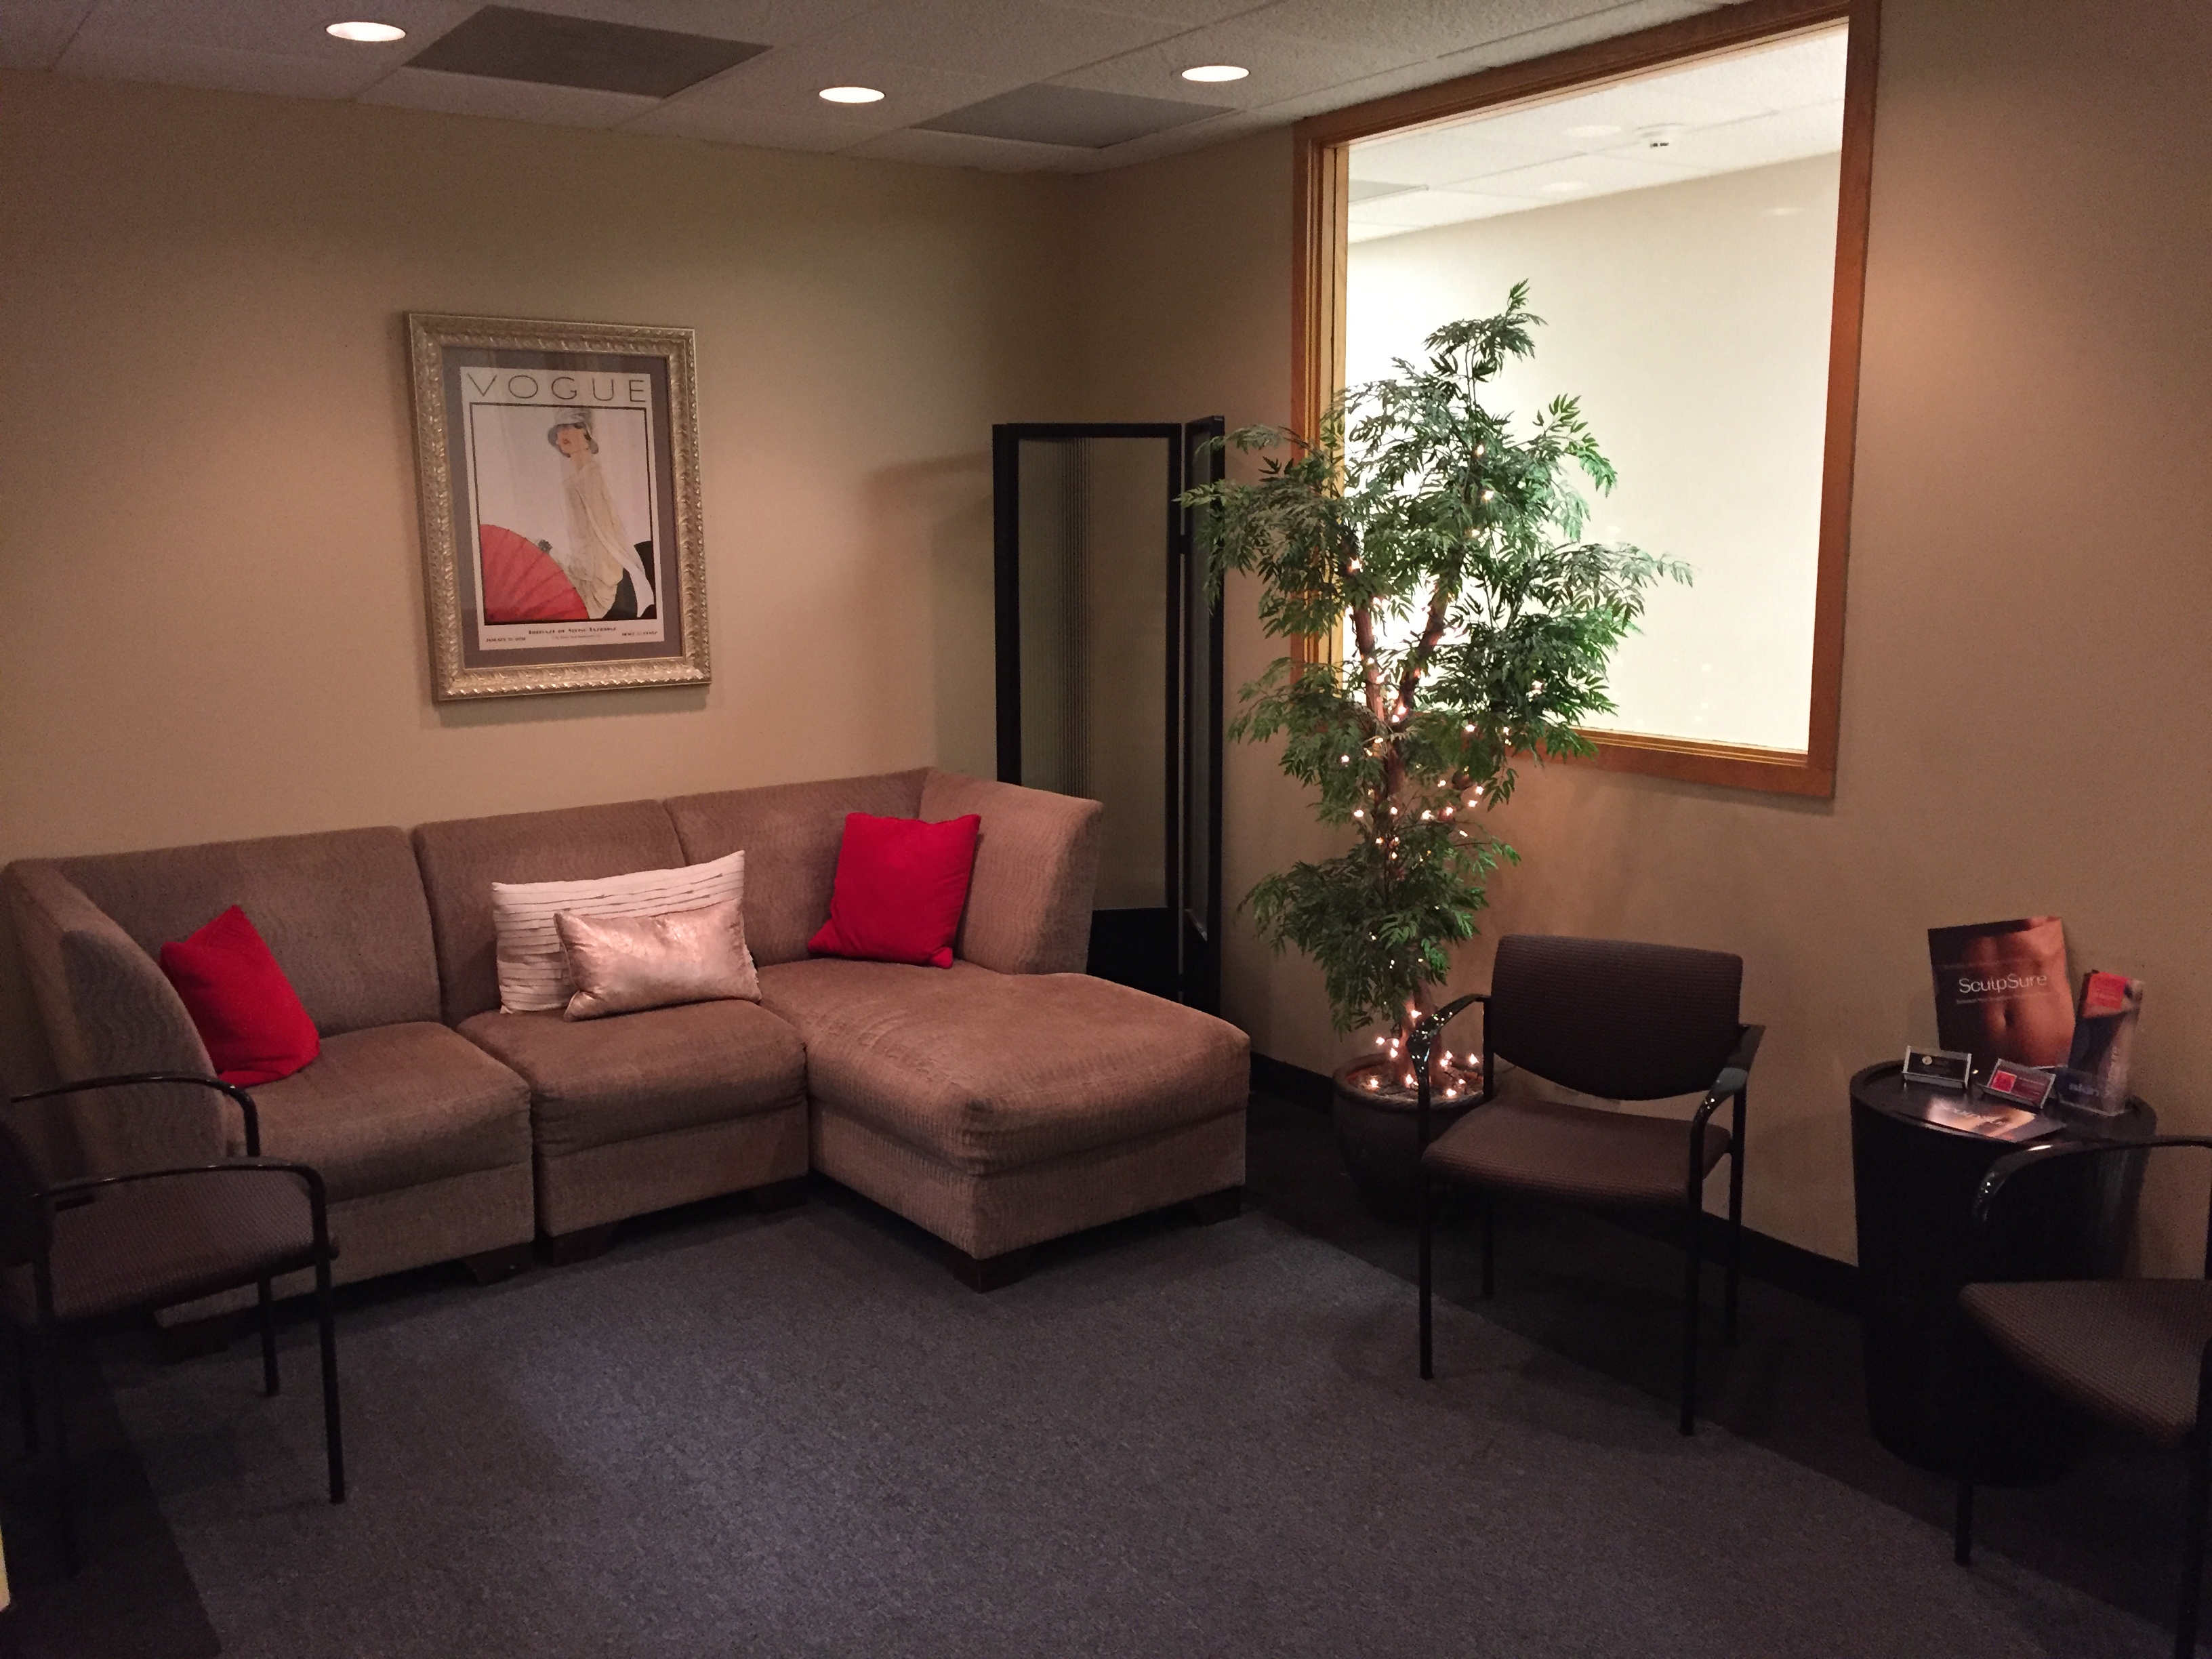 Dr. Rick Silverman's office waiting area